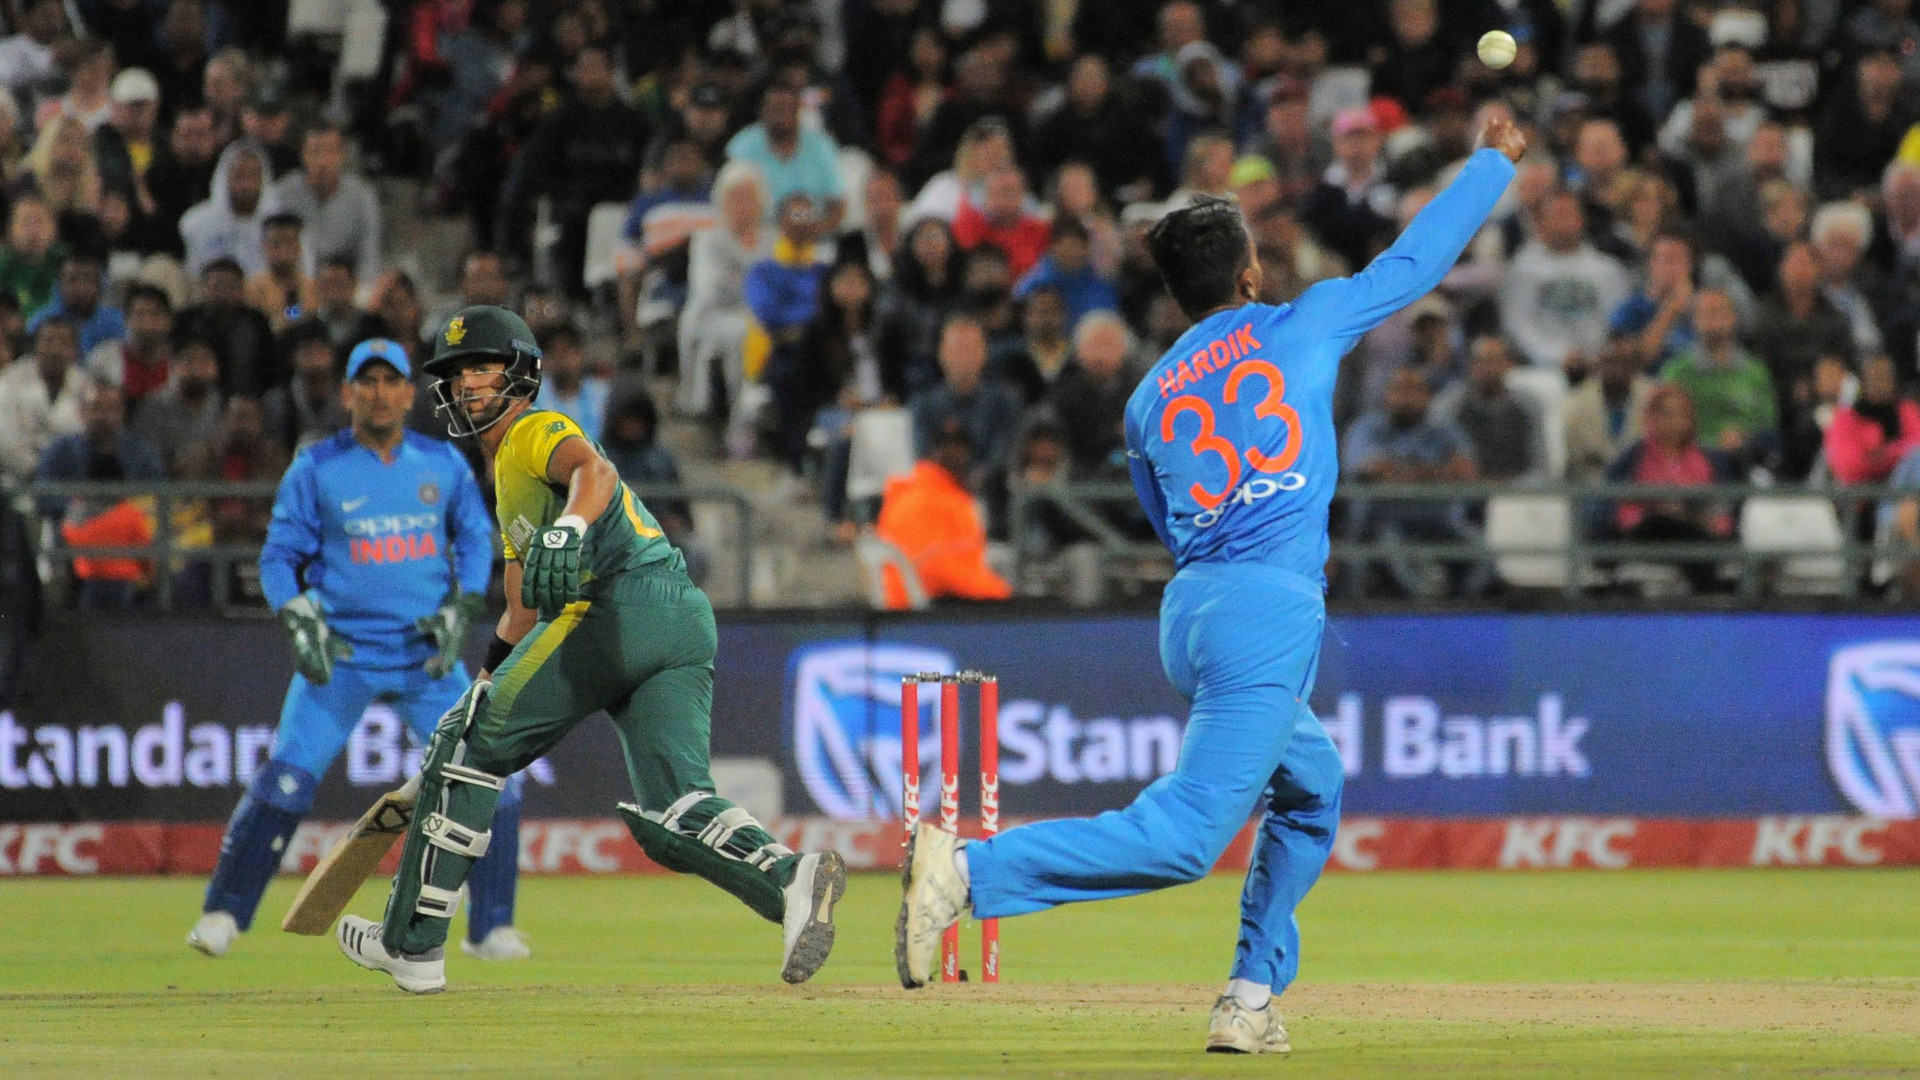 India vs South Africa live stream how to watch T20 cricket series online from anywhere TechRadar